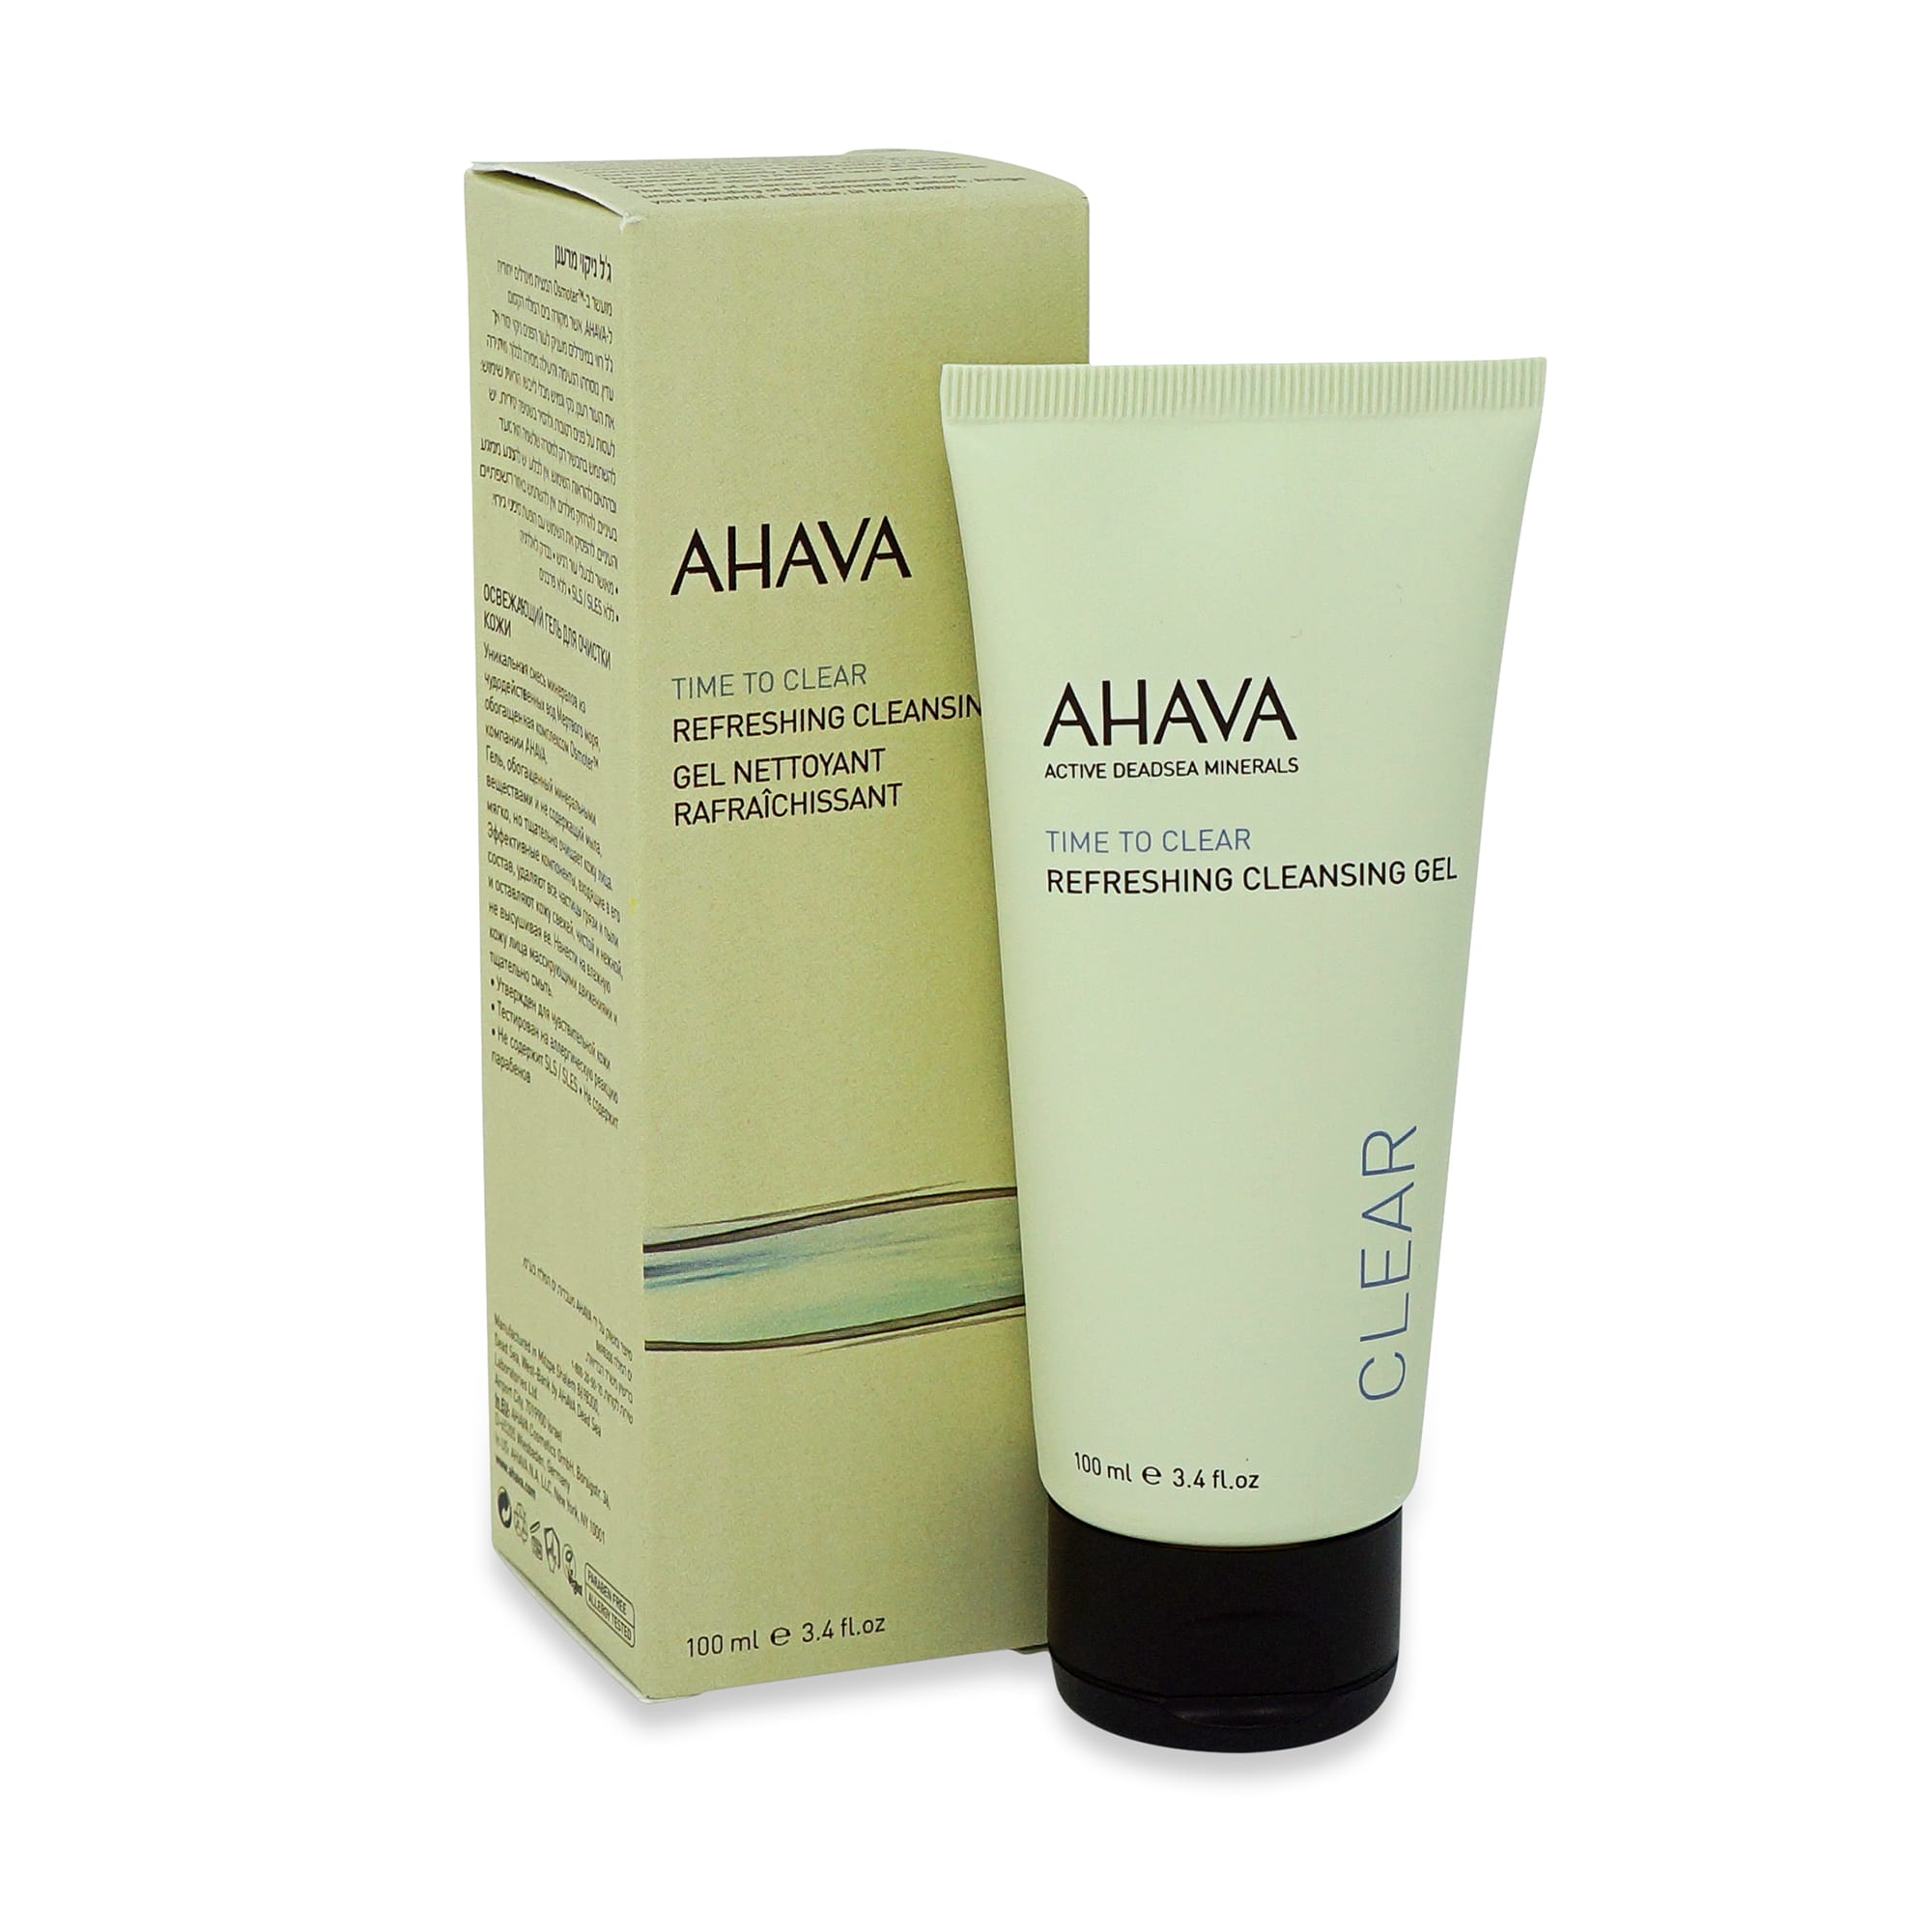 AHAVA Dead Sea Minerals Time to Clear Refreshing Cleansing Gel, 3.4 oz.